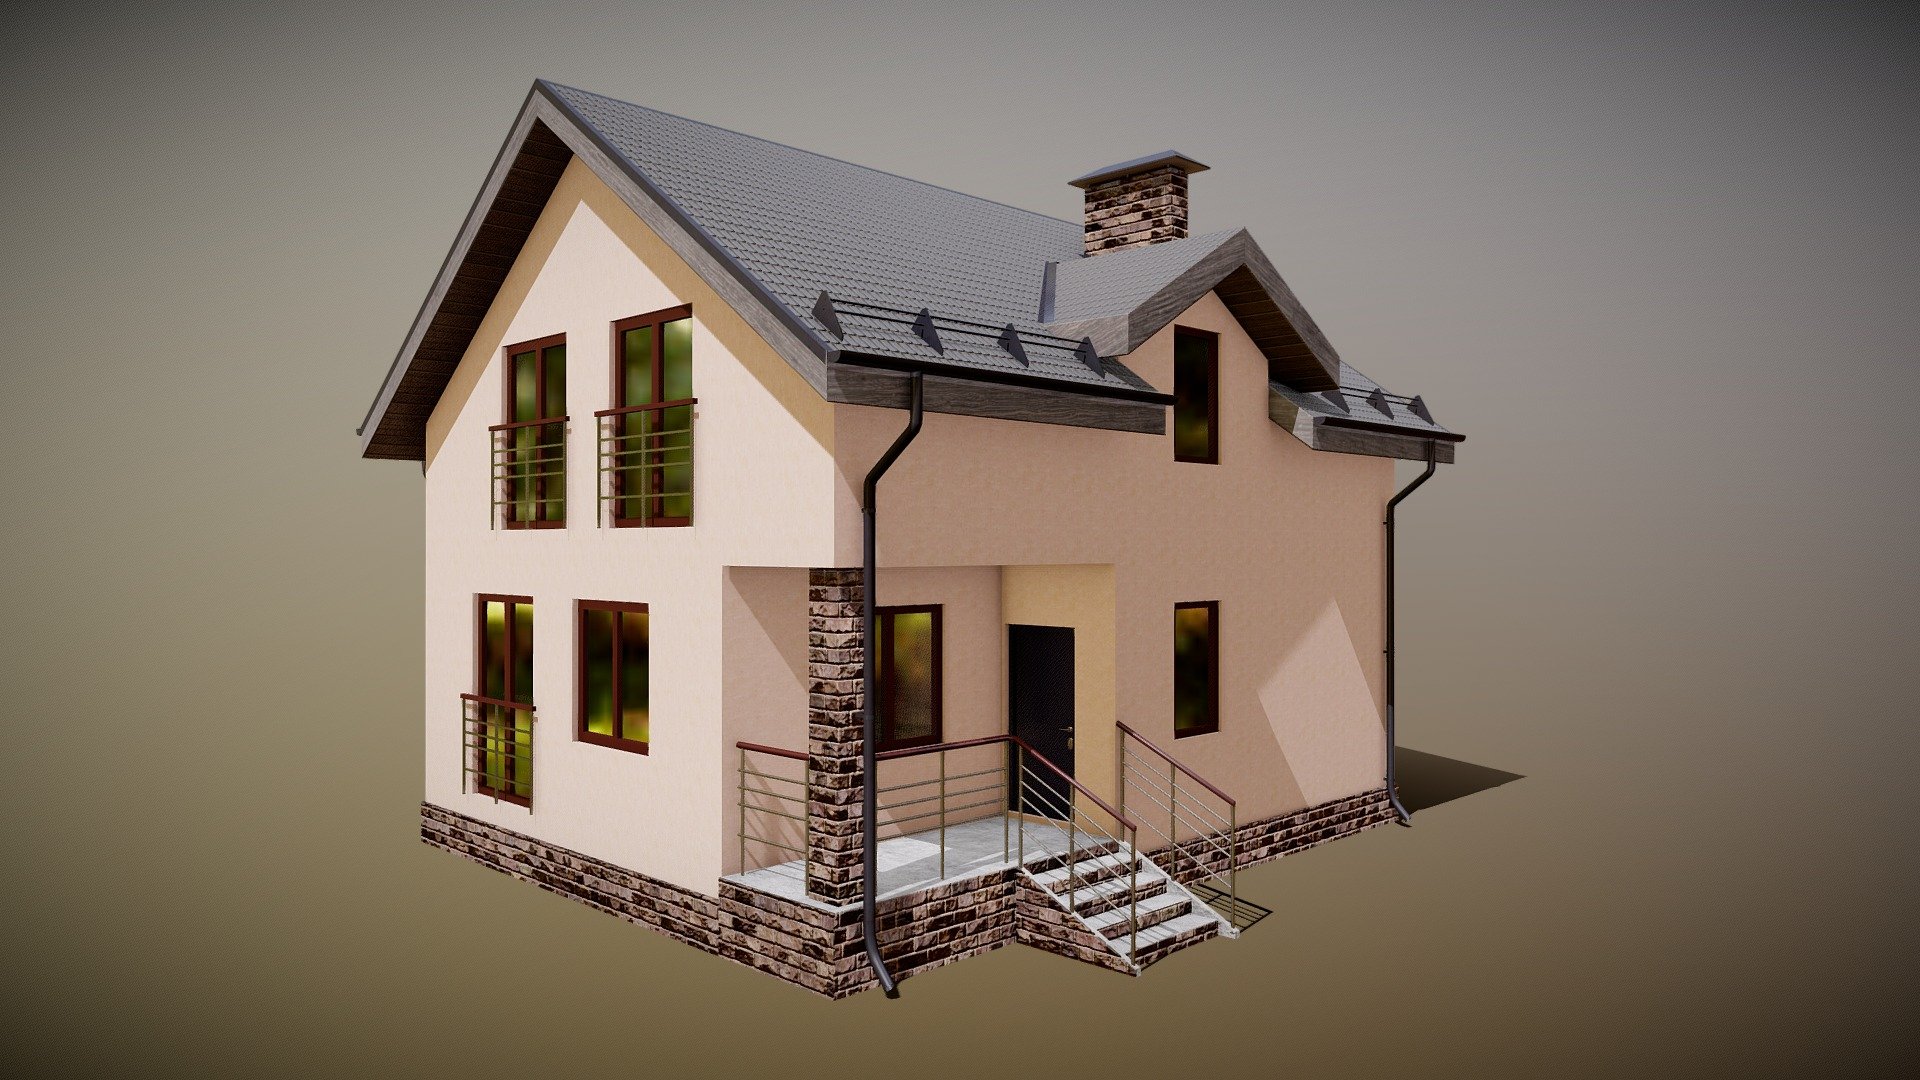 Hello!  

I am happy to present you Cottage 1 3d model.

You can buy that model at CGTrader website

Ready for game-development, render and animation!  




Native file format: Blender 2.79

Converted file formats: 3ds Max 2017, Cinema 4D R16, UnityPackage, .FBX, .OBJ.

1.844 faces total (Only Quads and Tris topology used).

TEXTURES: 




Base_Color.png (4096x4096px) 

Normal.png (4096x4096px) 

Metallic.png (4096x4096px) 

Roughness.png (4096x4096px) 

Height.png (4096x4096px) 

AO.png (4096x4096px) 

Windows_mask.png (4096x4096px)

MetallicSmoothness.png (4096x4096px)

DESCRIPTION: 




Model is fully textured with all materials applied (Converted formats .MAX, .C4D, .Unitypackage as well). 

LowPoly model, that is perfect for even mobile game-dev. 

PBR materials, as you can see on the preview. 

Formats .MAX, .C4D, .OBJ, .FBX, Unitypackage are included. 

Gerhald3D - Low-Poly PBR Cottage 1 - 3D model by Gerhald 3d model